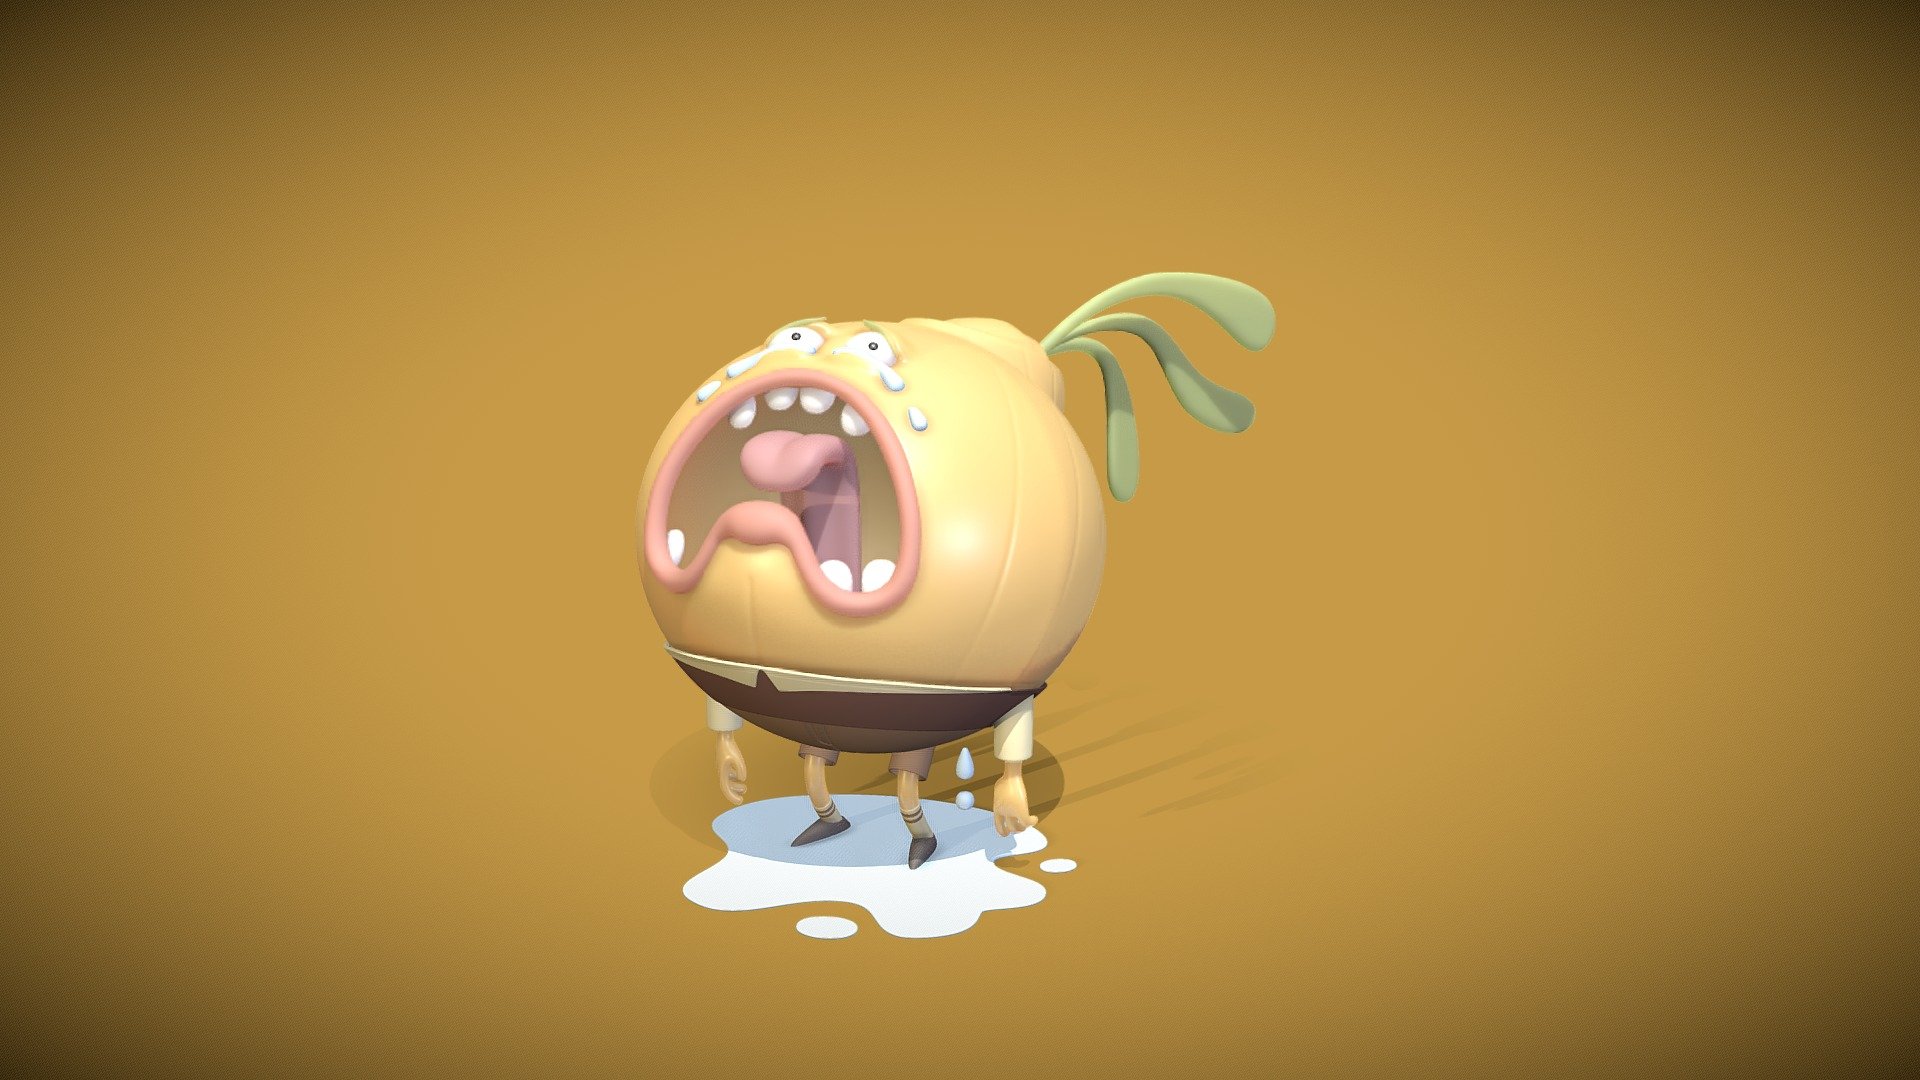 The sad life of an onion 🧅

Based on a character concept by Leonard Furuberg.

Created for a single viewpoint, so the backside lacks details.

🎨 https://metinseven.nl


onion #character #design #illustration #cartoon #cry #vegetable #vegan #3d #b3d #blender3d #octanerender - Crying Onion 🧅 - 3D model by Metin Seven (@metinseven) 3d model